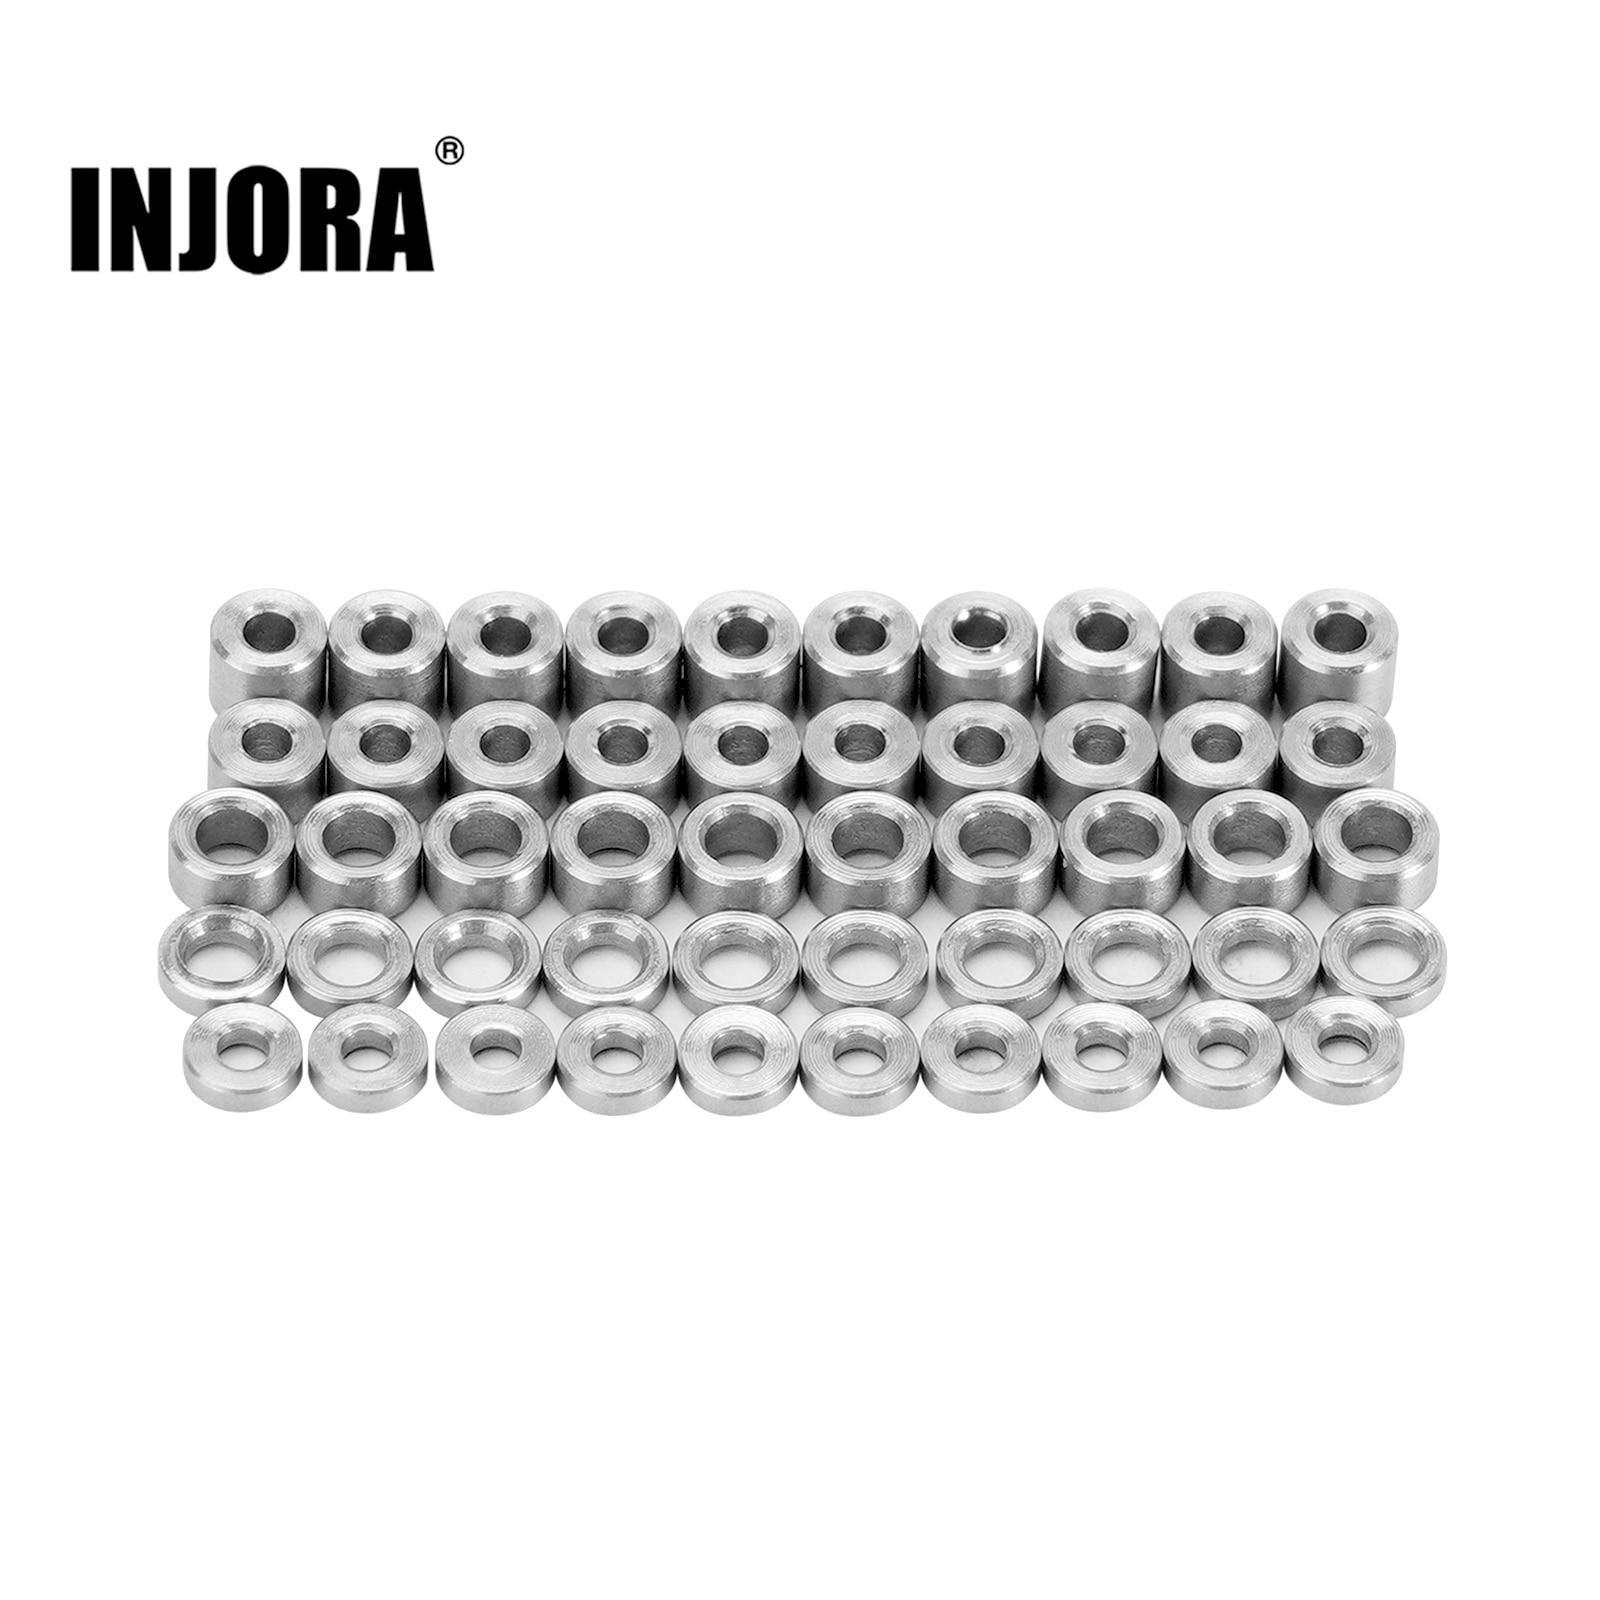 INJORA-50PCS-M1-4-M2-Flat-Stainless-Steel-Washers-Spacers-For-1-24-RC-Crawler-SCX24.jpg